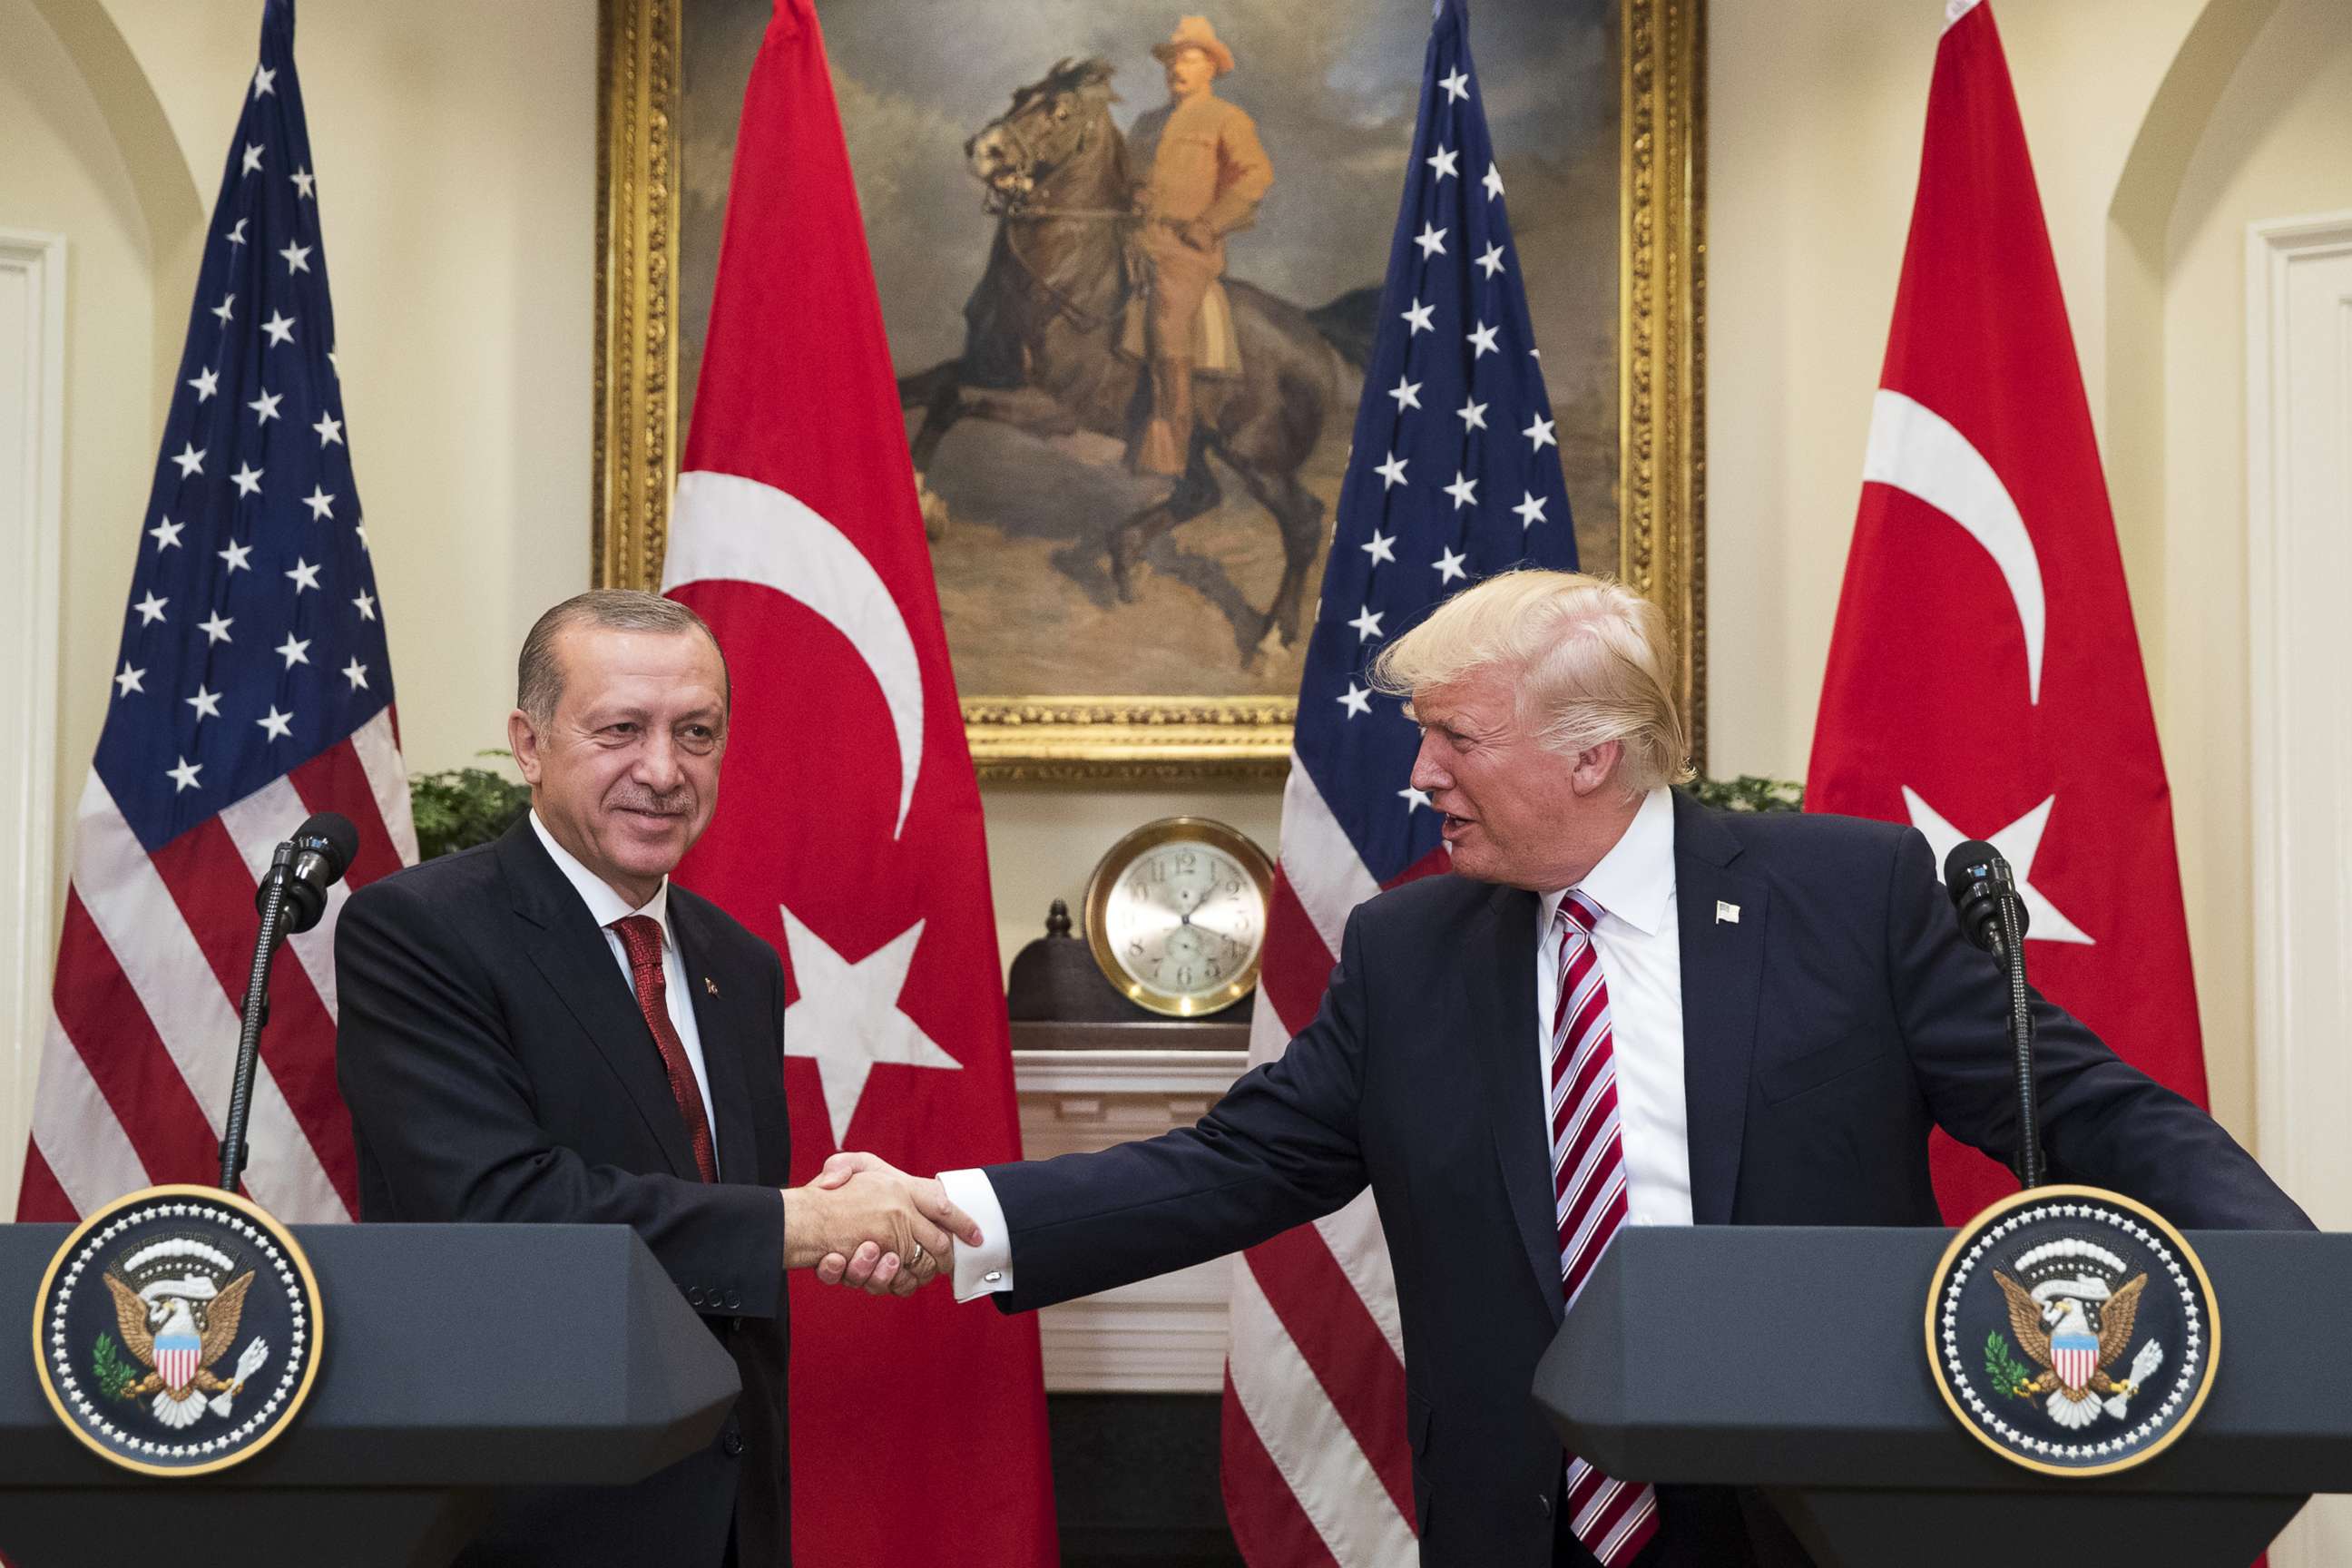 PHOTO: President Donald Trump shakes hands with President of Turkey Recep Tayyip Erdogan in the Roosevelt Room where they issued a joint statement following their meeting at the White House, May 16, 2017 in Washington, D.C.